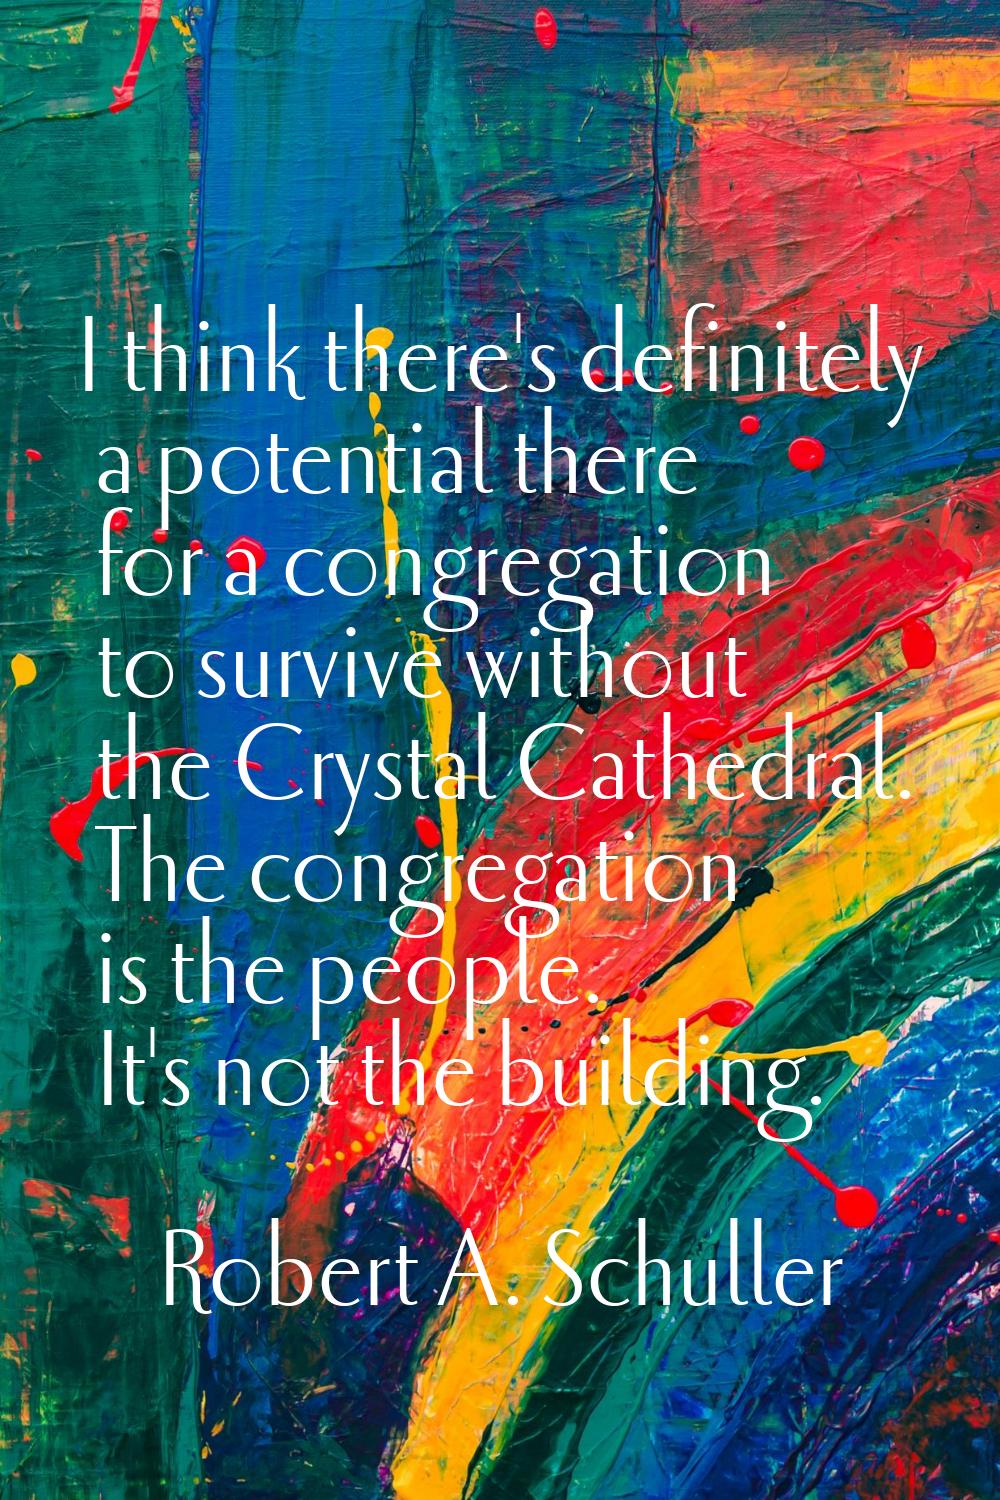 I think there's definitely a potential there for a congregation to survive without the Crystal Cath